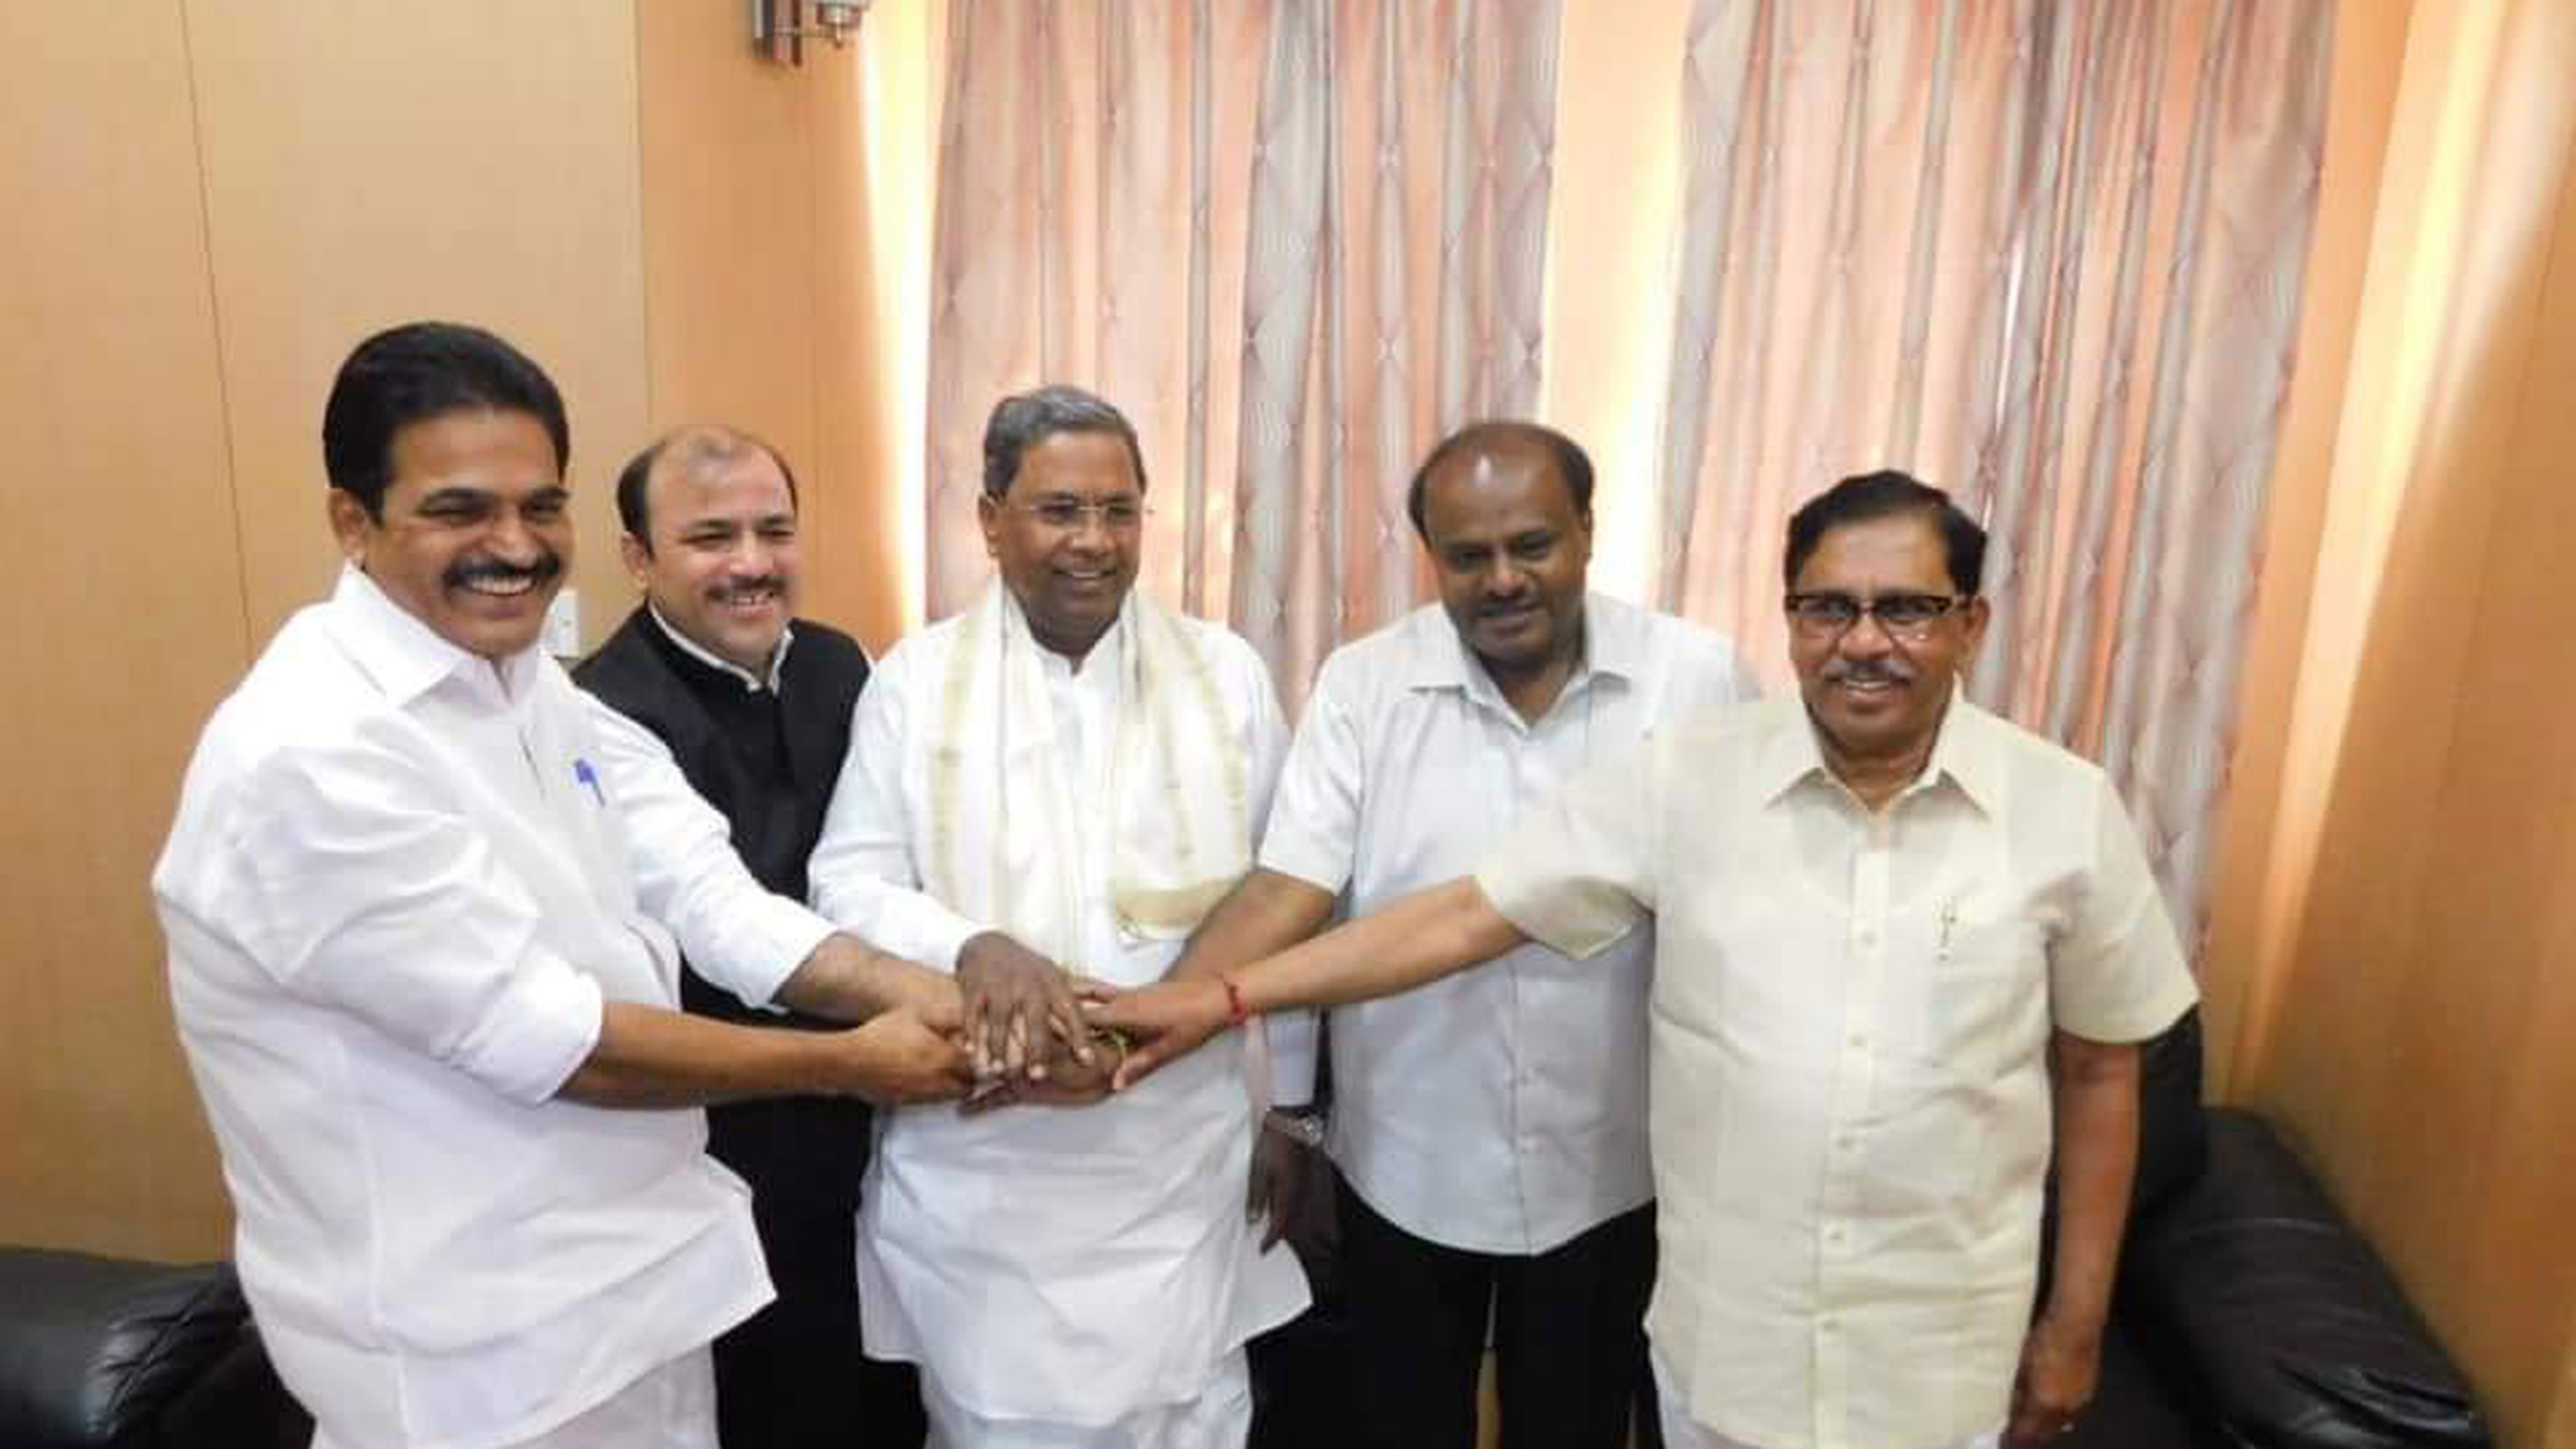 Congress leader K.C. Venugopal, former JD(S) leader Danish Ali (now in BSP), Congress leader Siddaramaiah, former Karnataka chief minister H.D. Kumaraswamy and ex-deputy chief minister G. Parameshwara in March 2019. The latter three have been booked for sedition.
